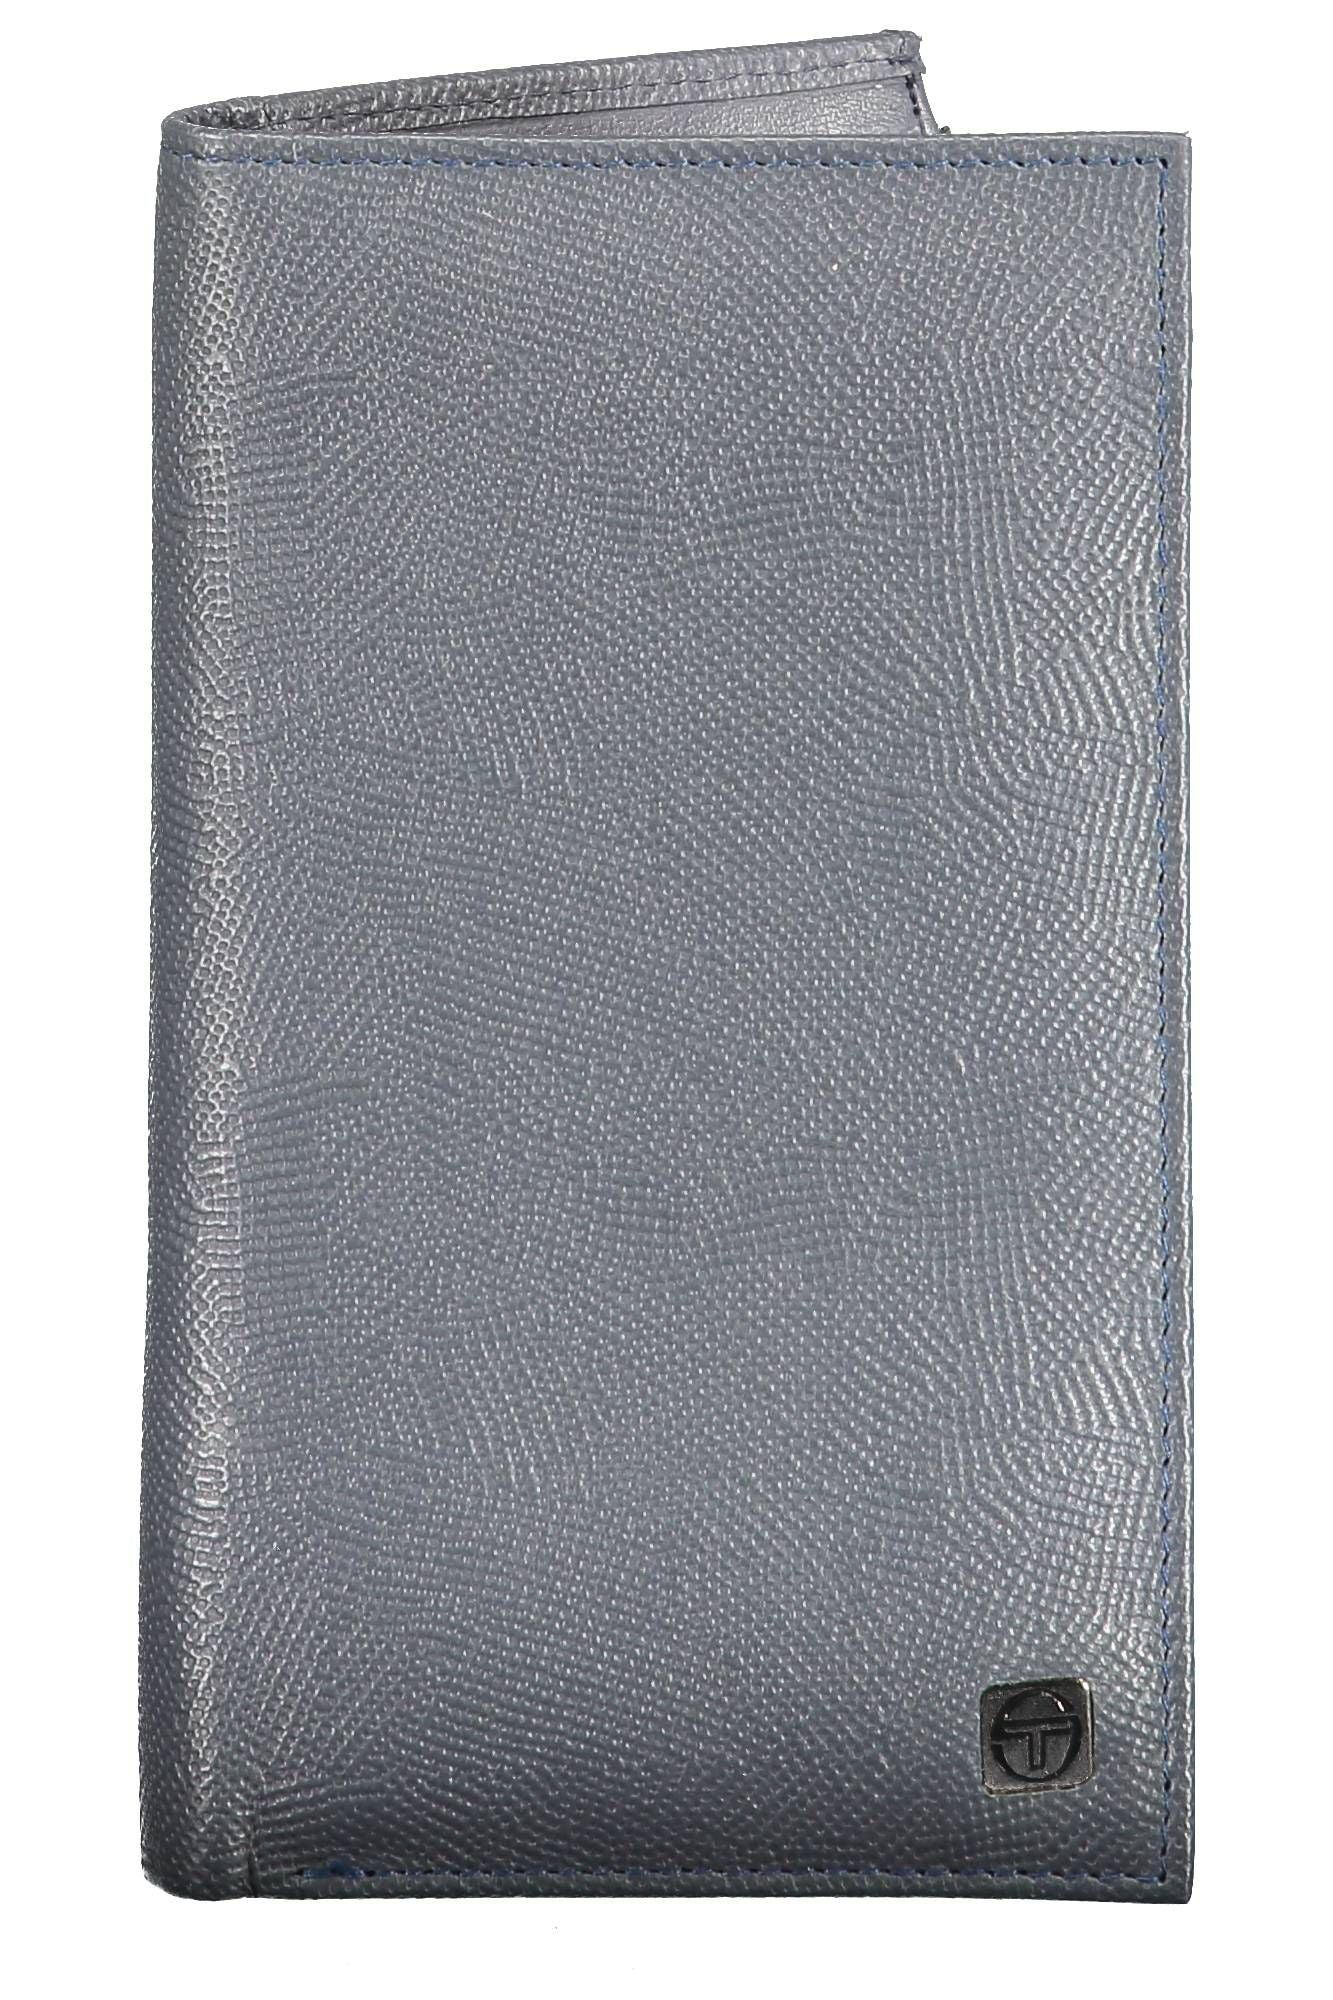 Sergio Tacchini Sleek Double Compartment Leather Wallet